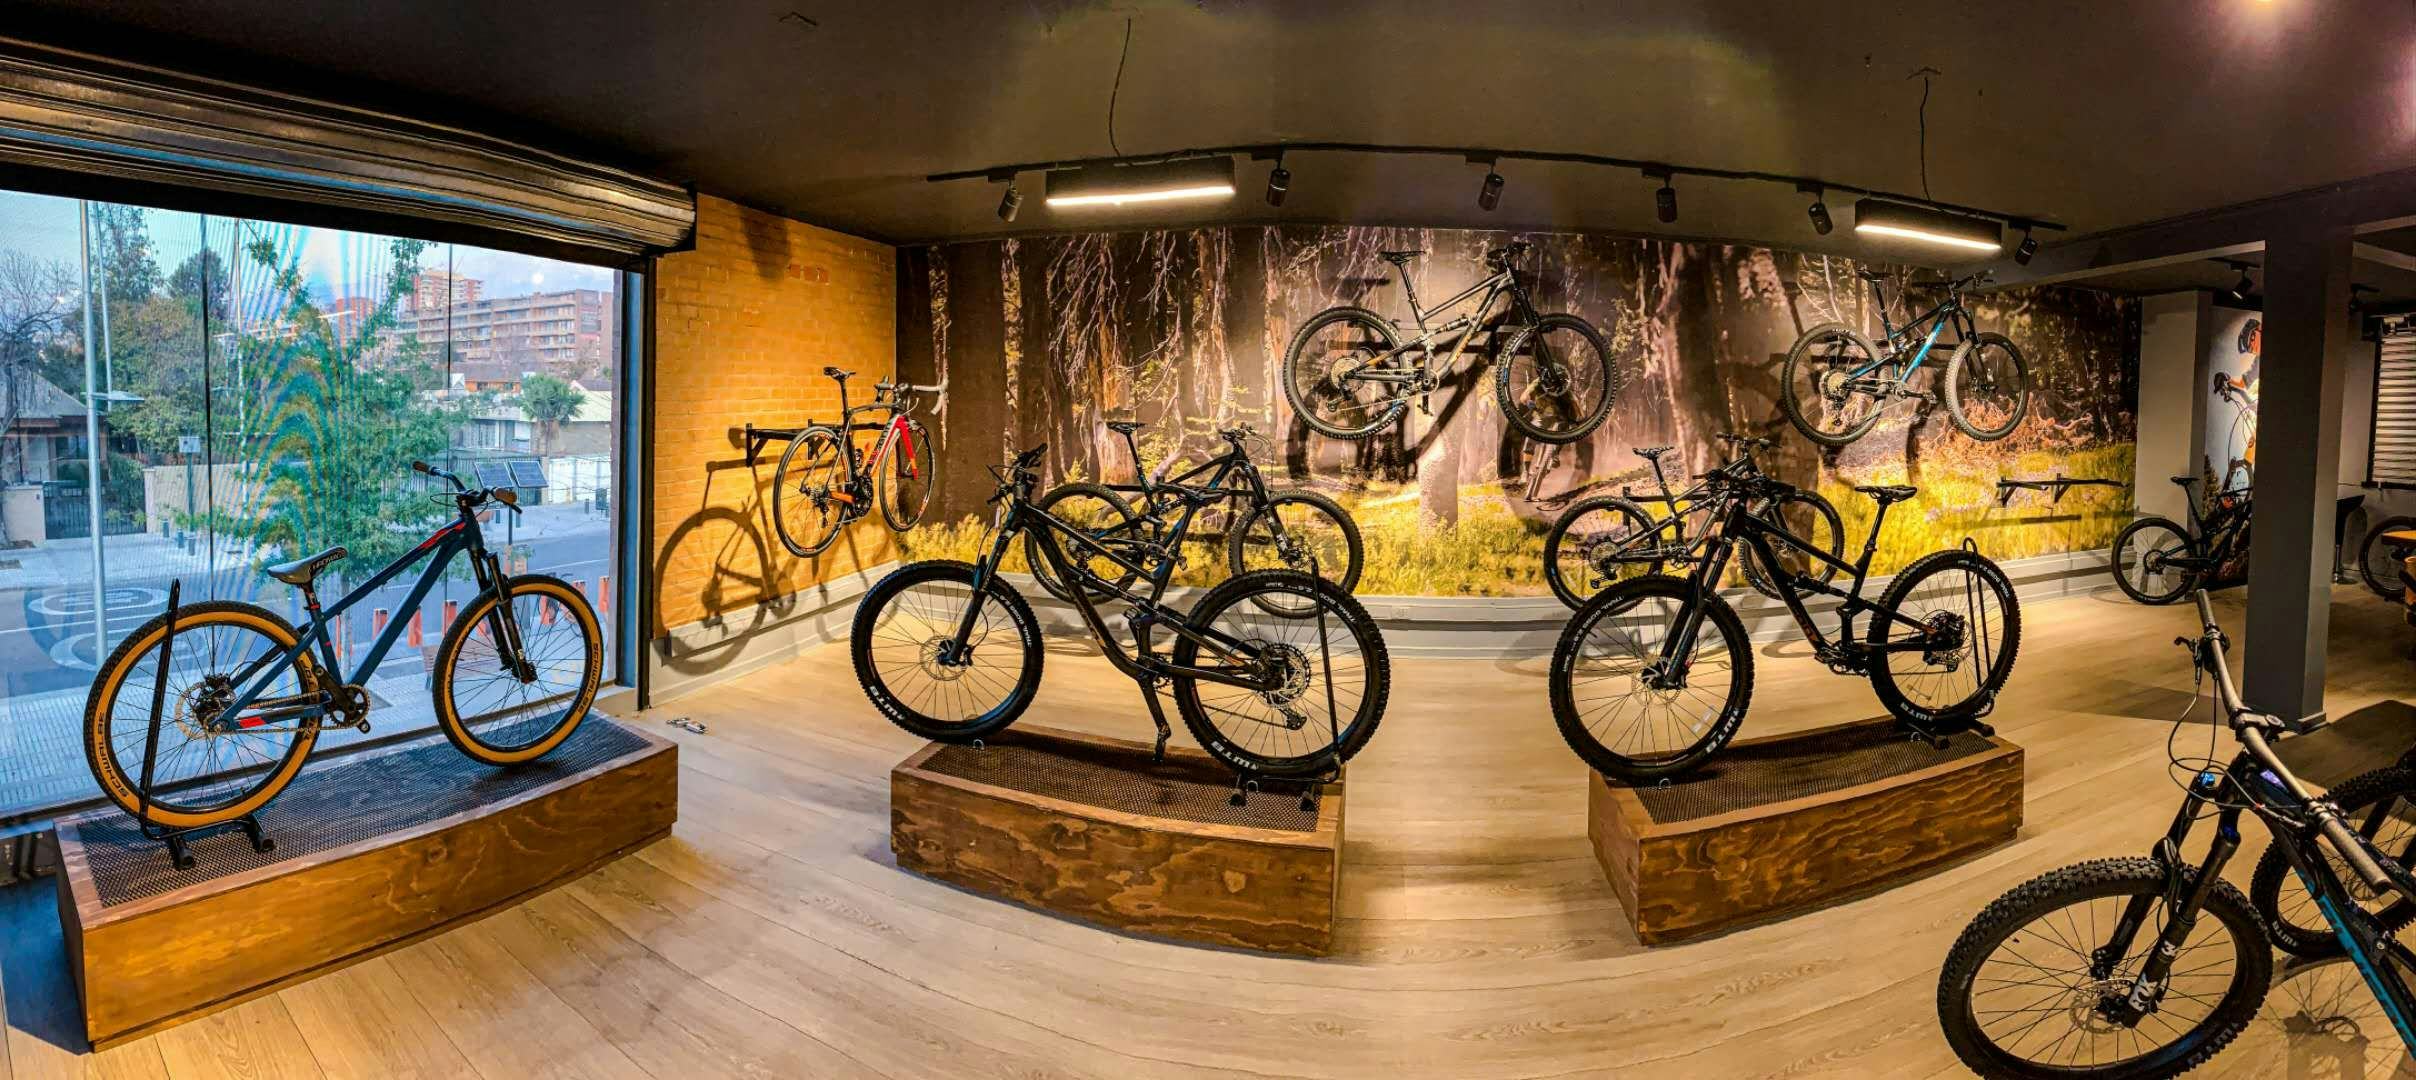 Agility as a recipe for growth - a case study of Polygon Bike